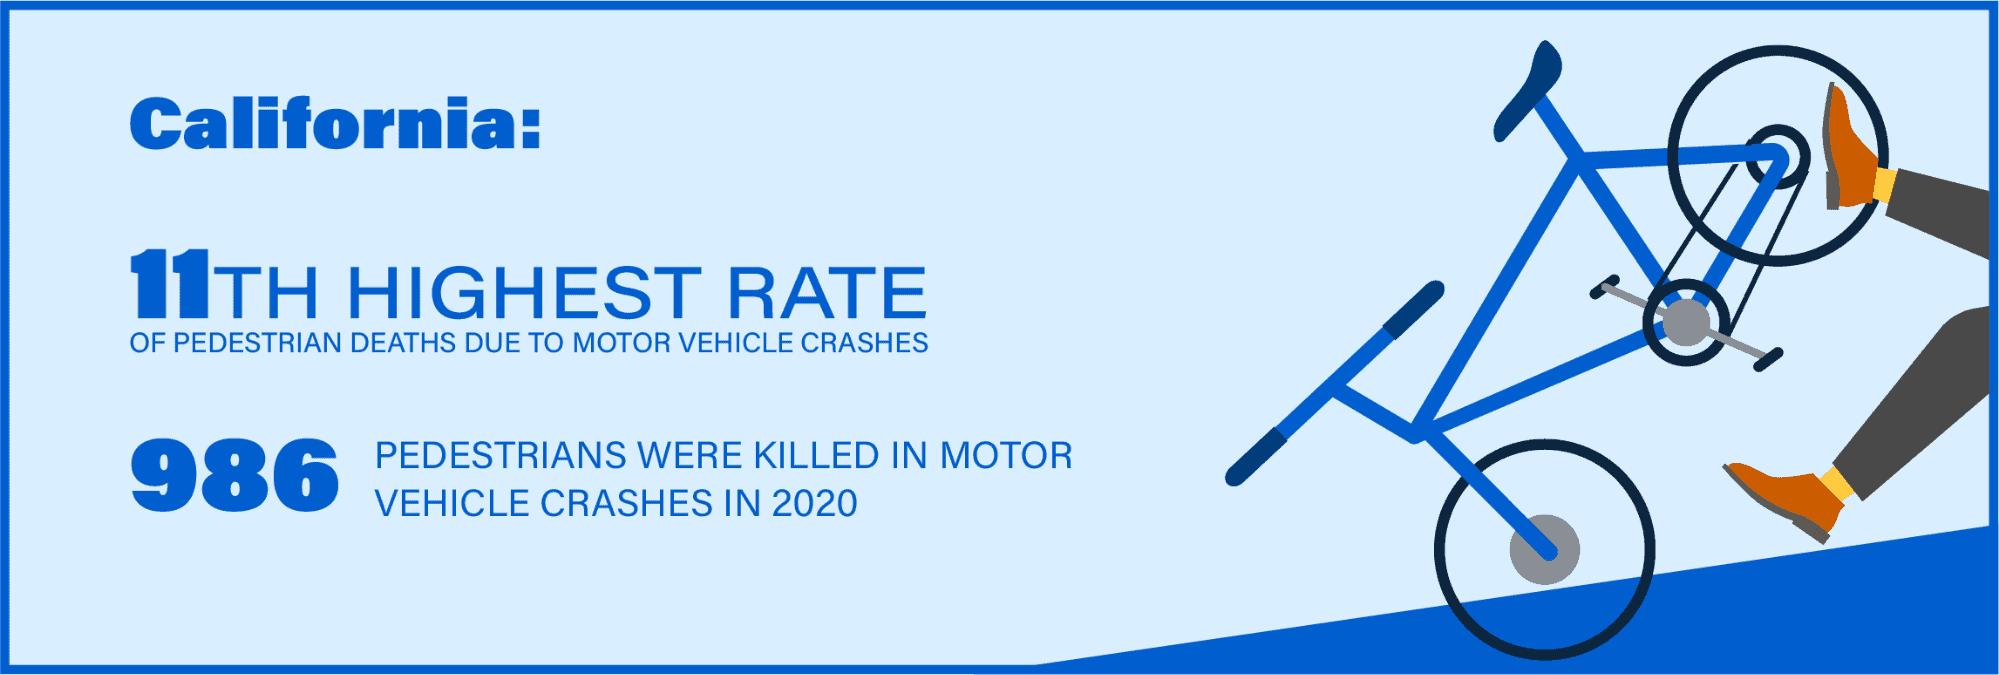 California has the 11th highest rate of pedestrian deaths due to motor vehicle crashes.